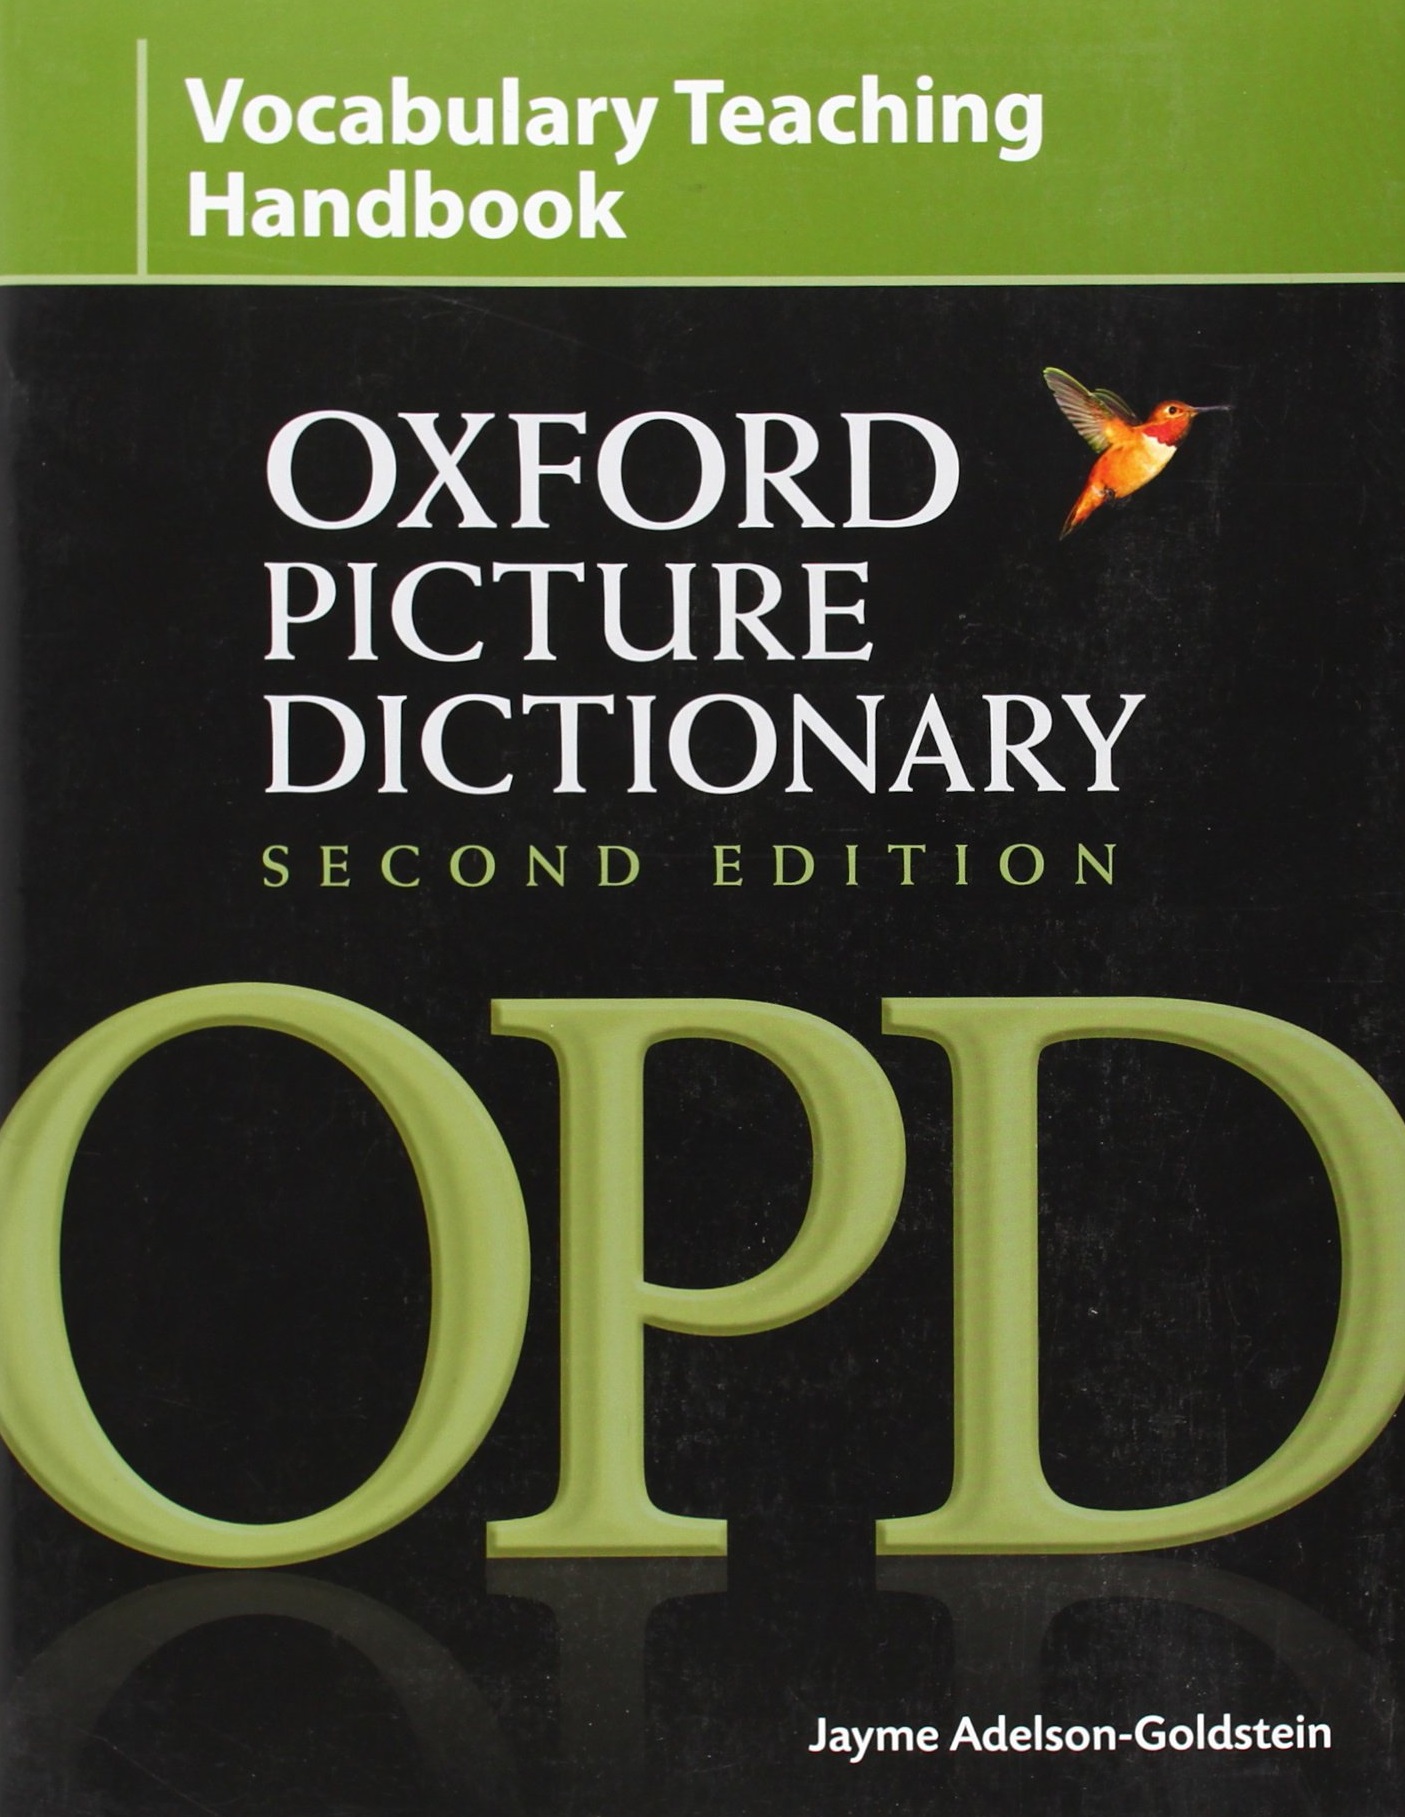 Oxford Picture Dictionary (Second Edition) Vocabulary Teaching Handbook